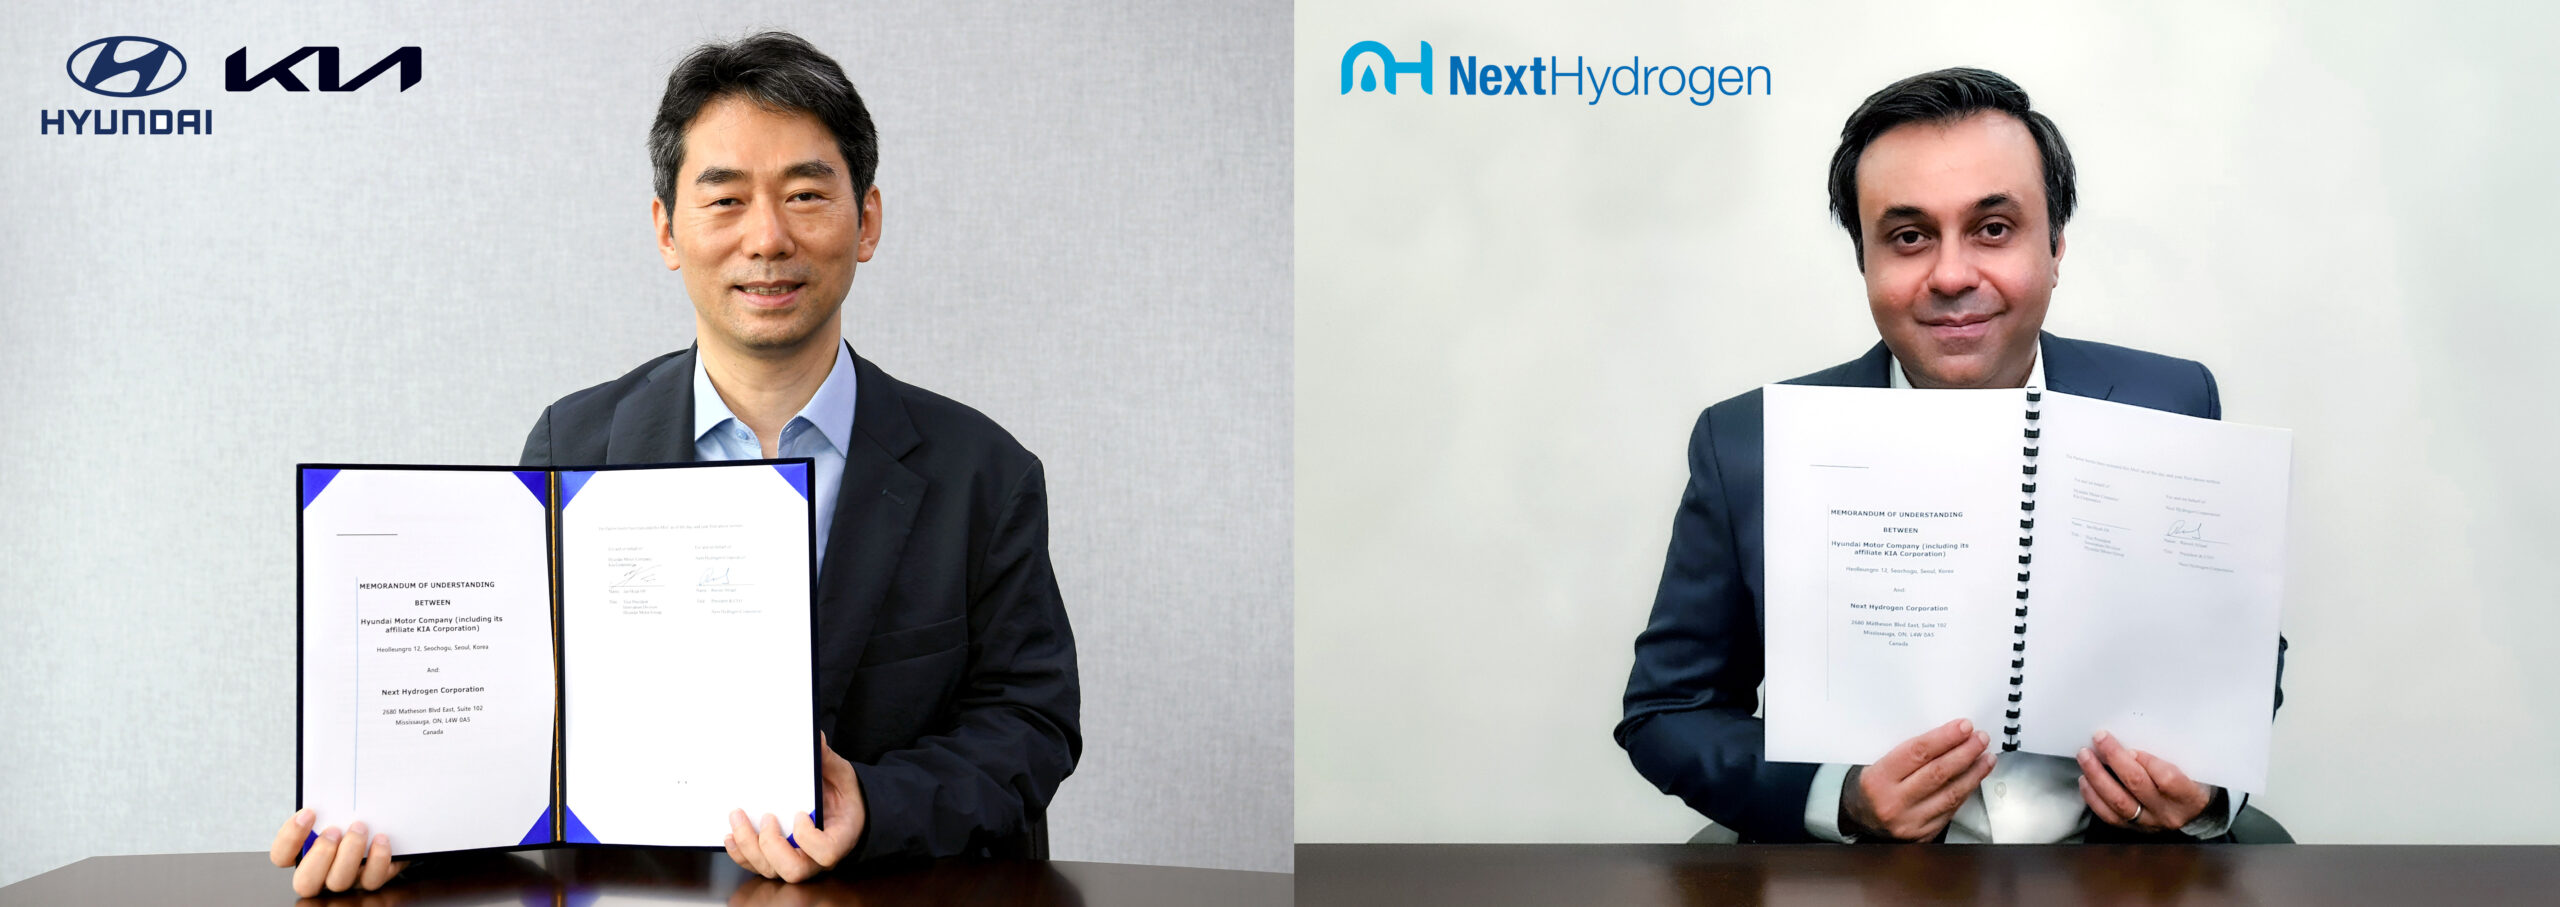 Hyundai Motor and Kia announce new collaboration with Next Hydrogen